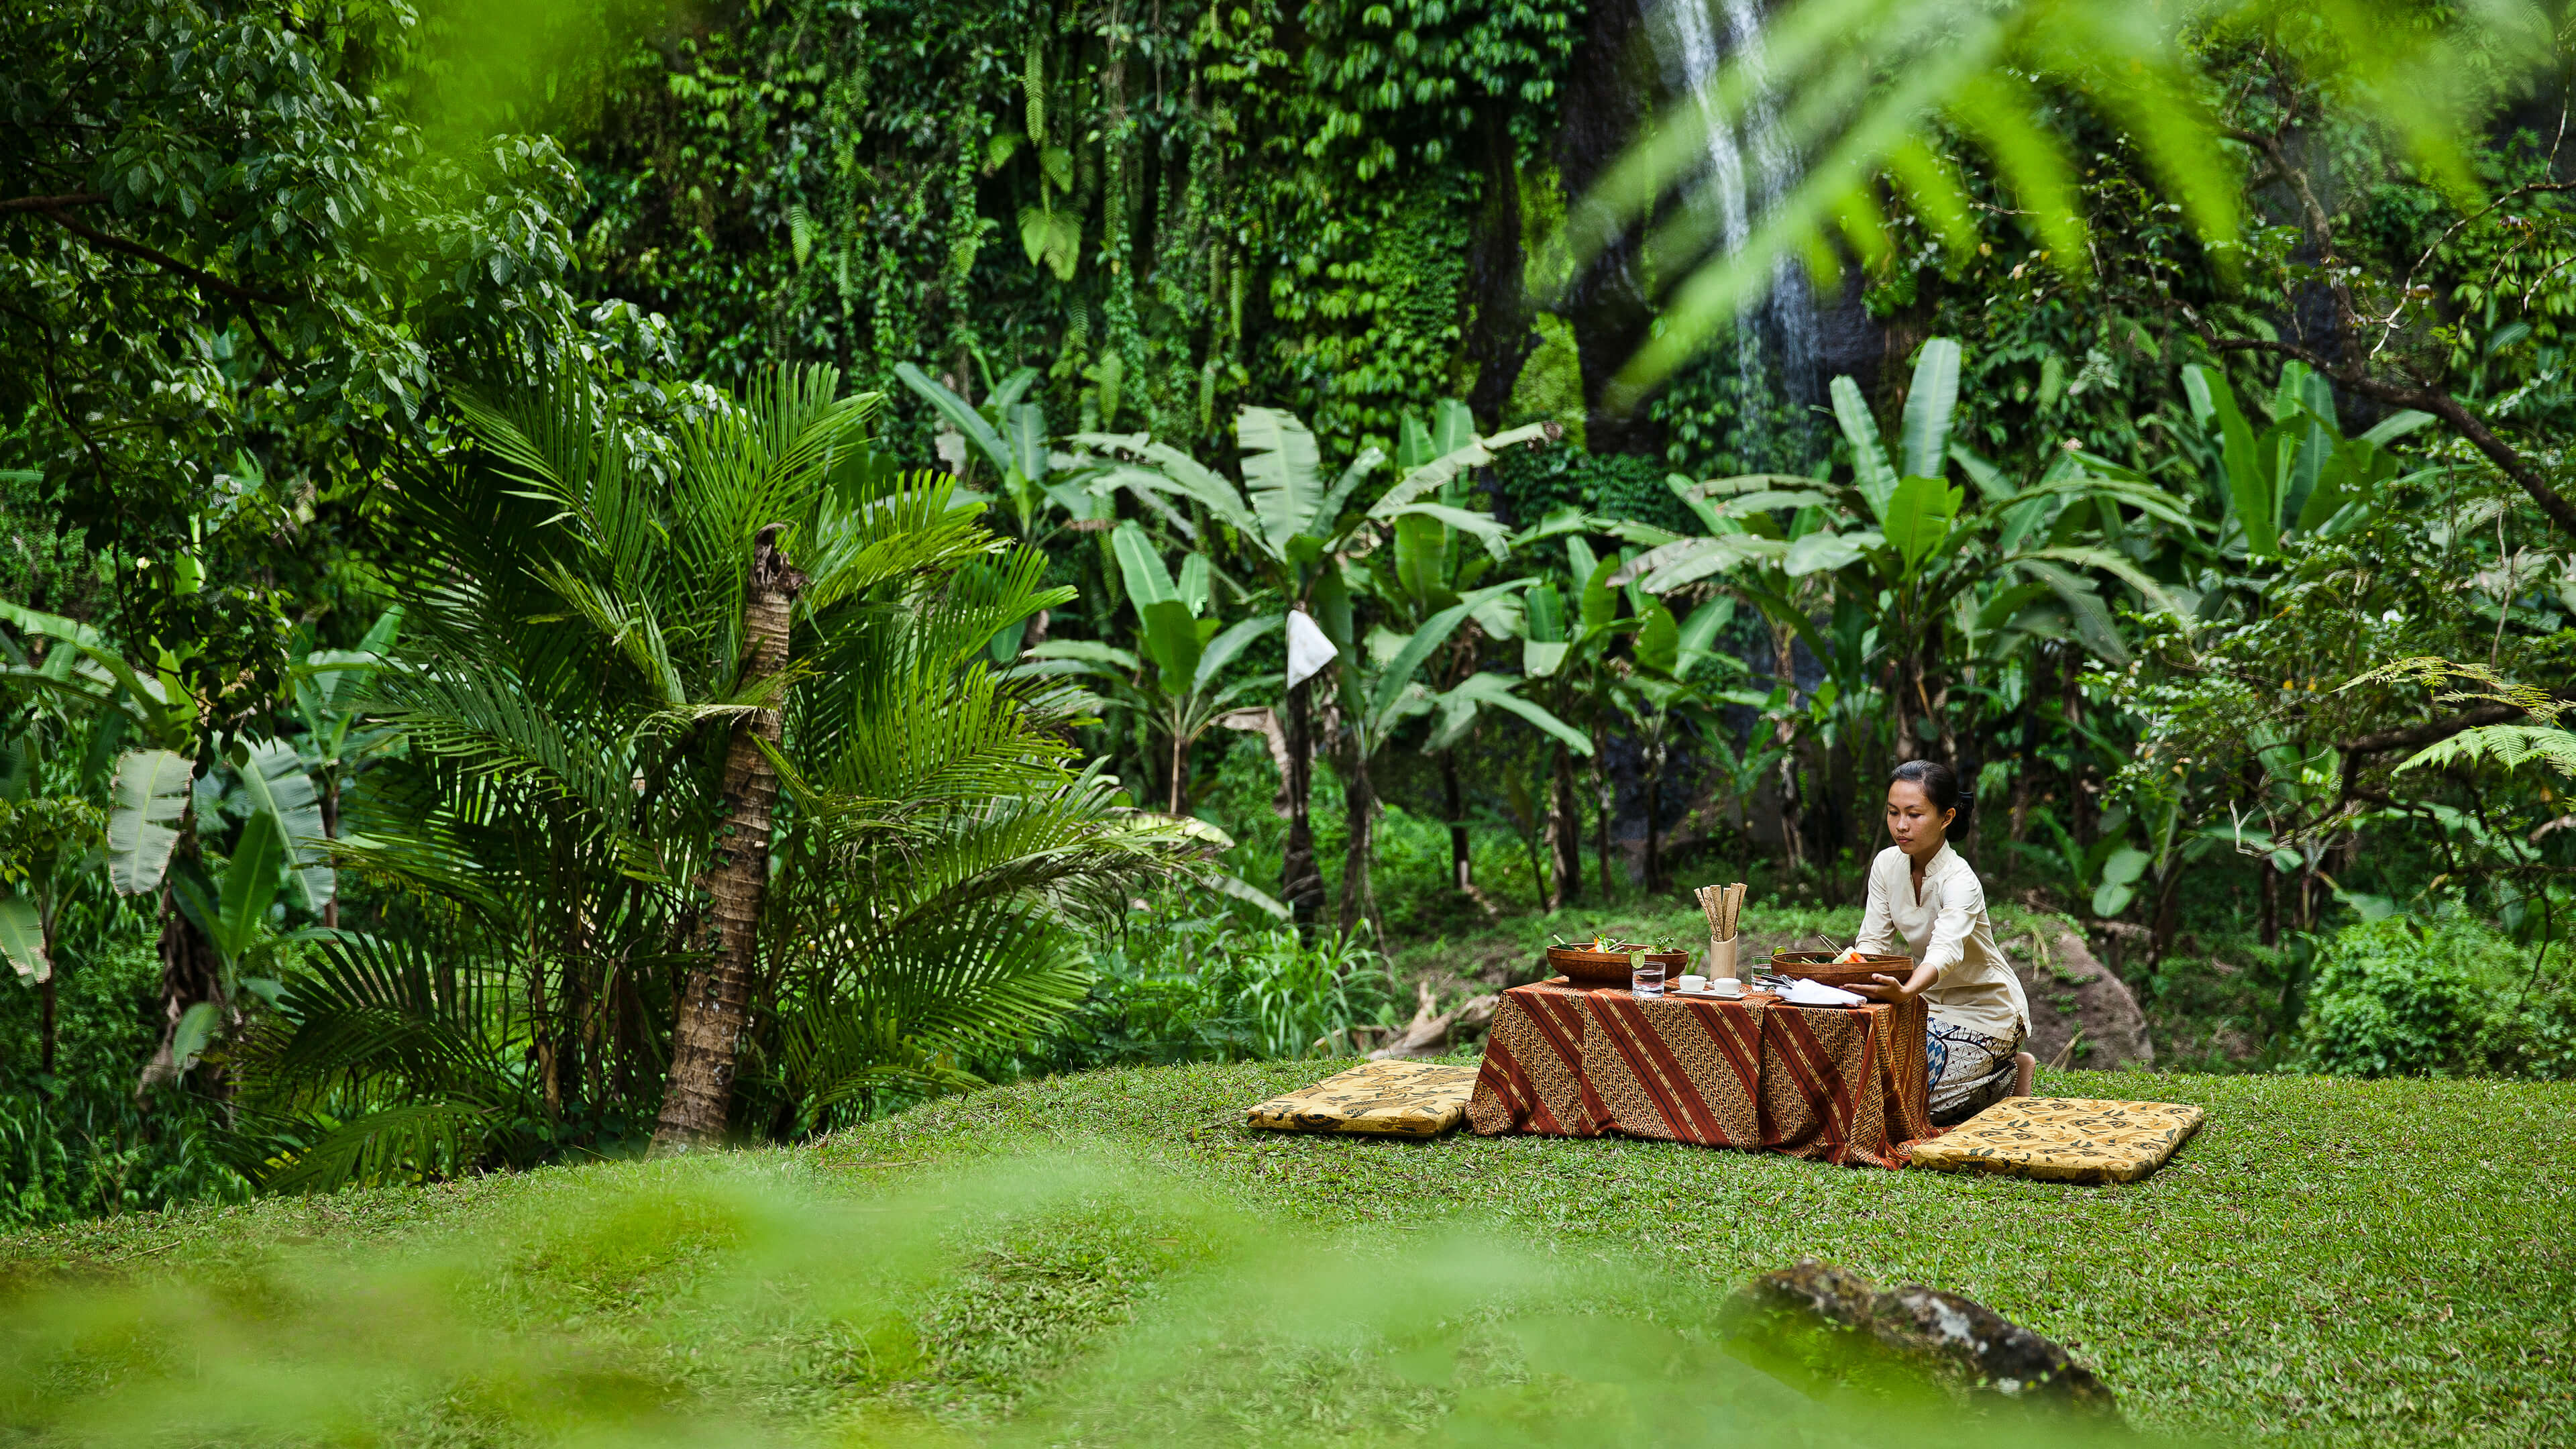 A Person Sitting On A Bench In A Tropical Area